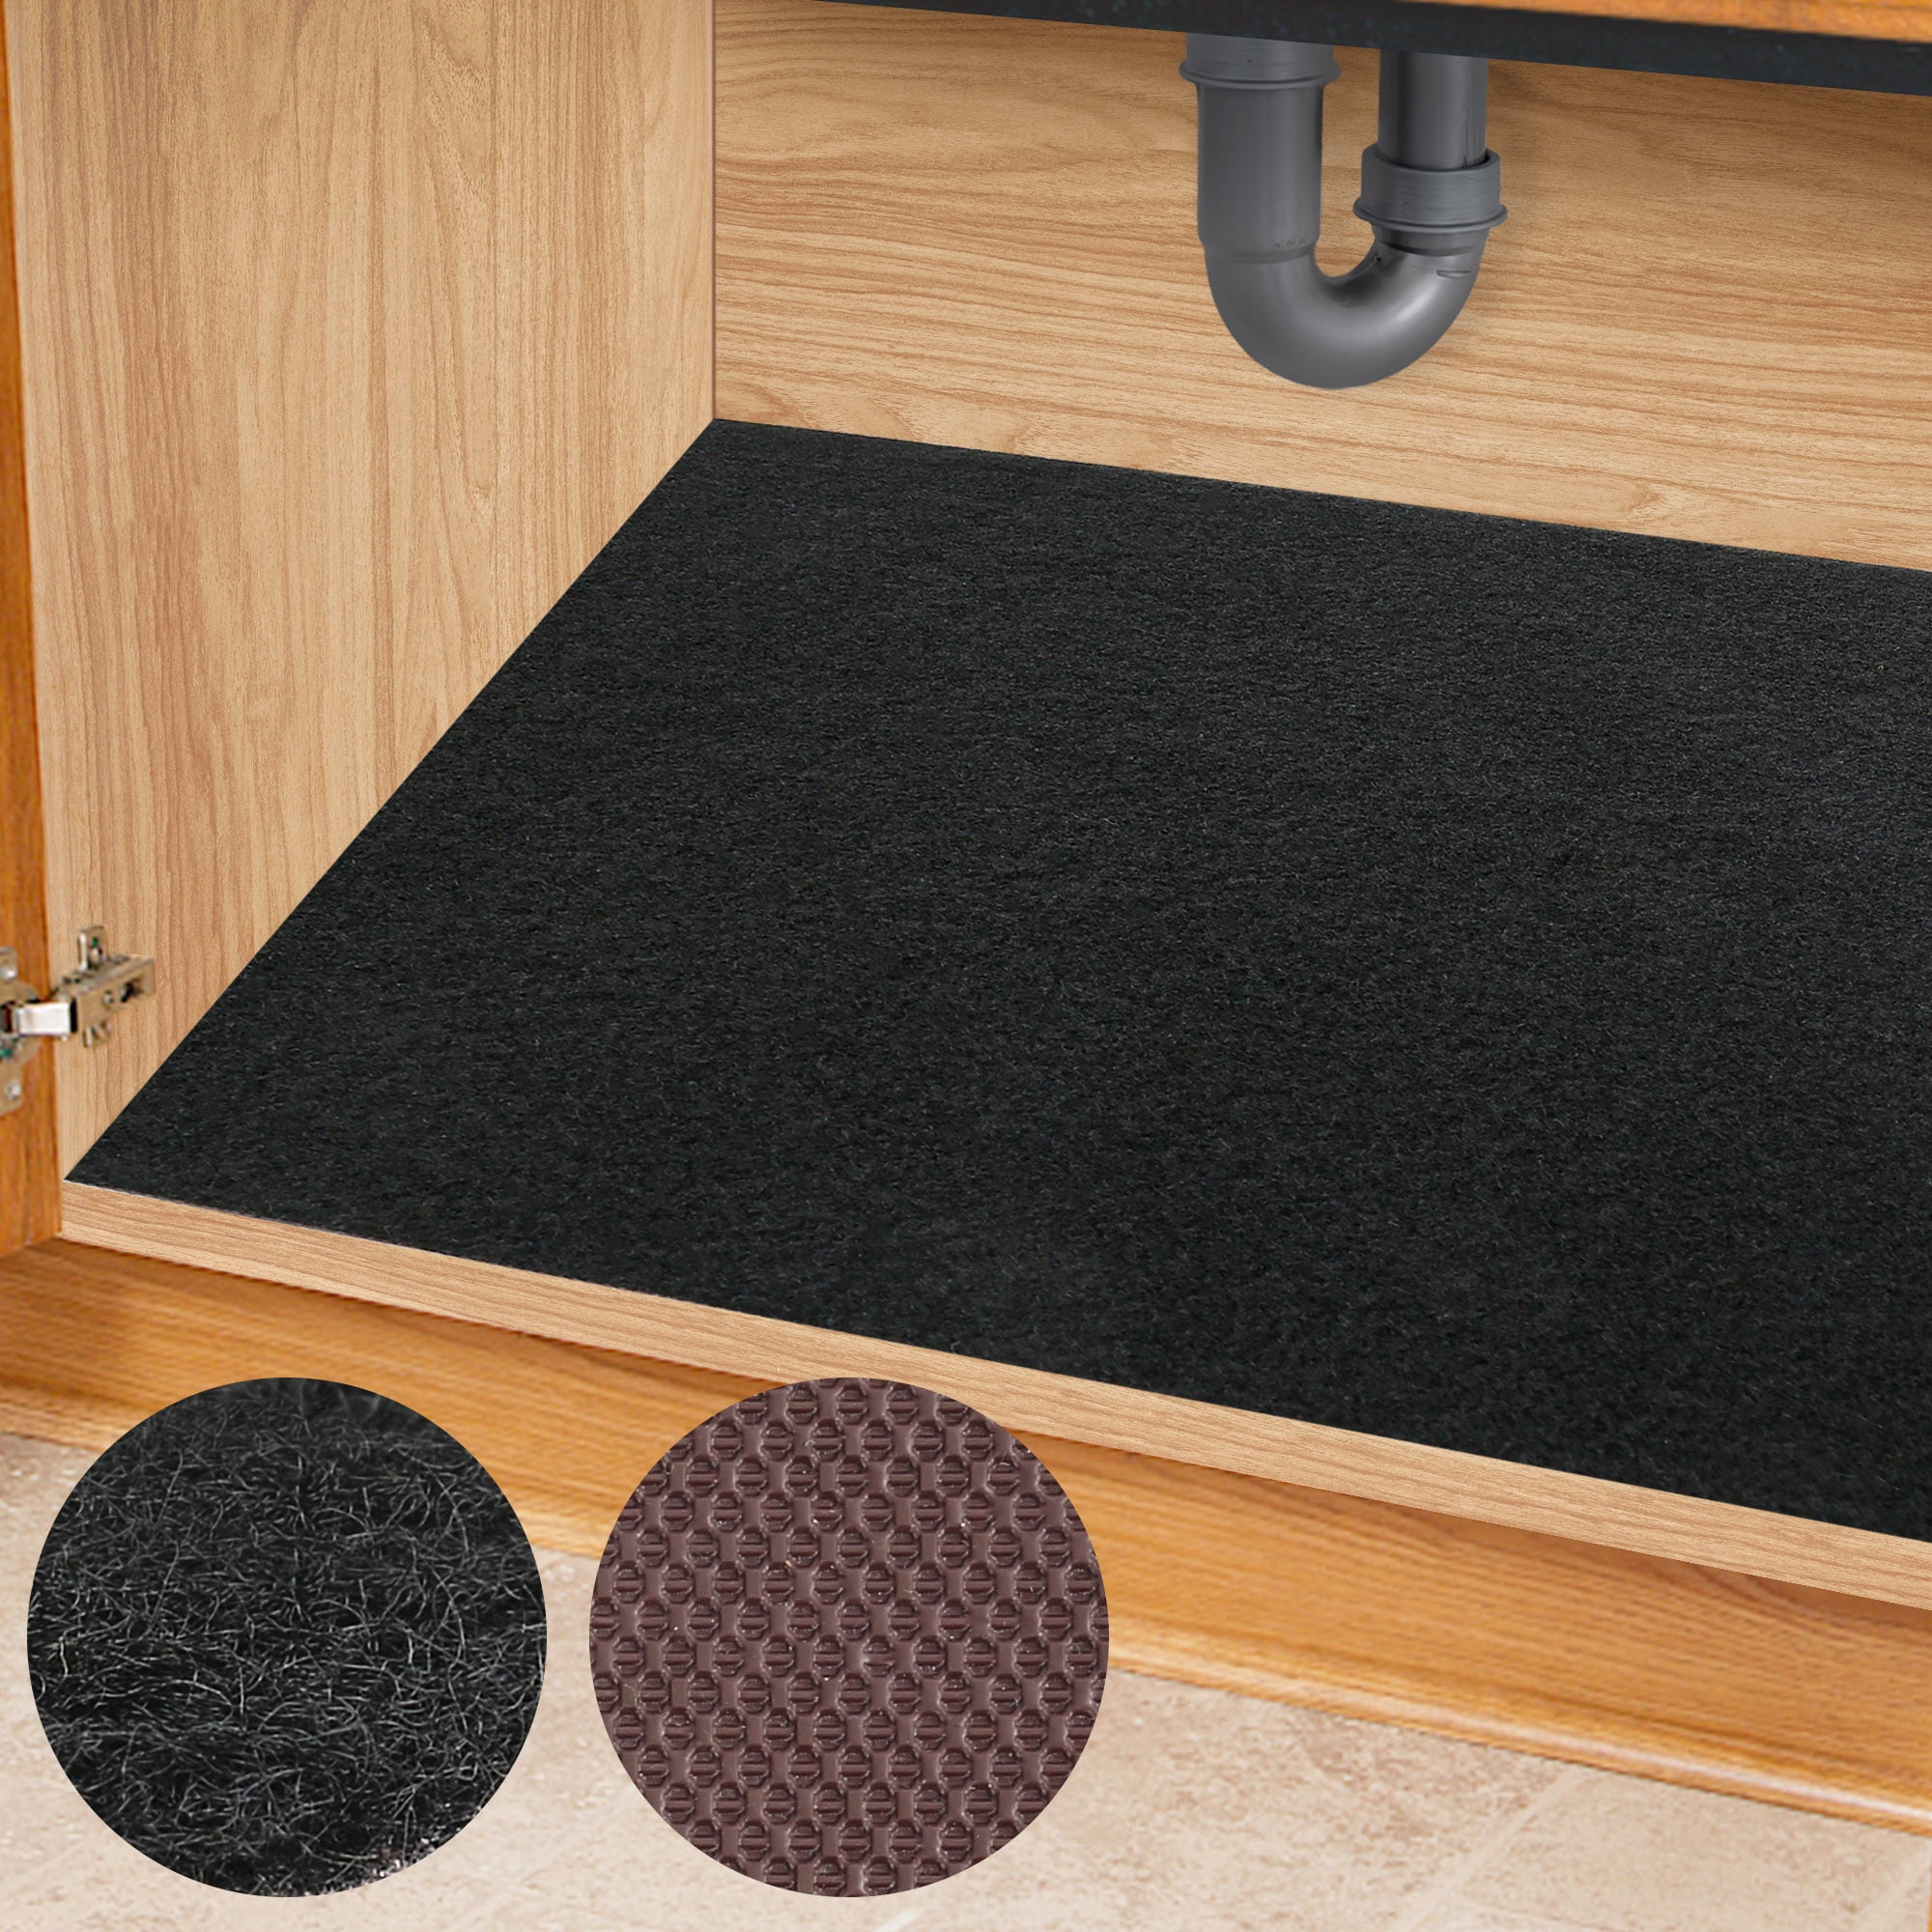  AiBOB Waterproof Under Sink Mat, Absorbent Quick Dry Sink  Liners Protect Cabinets, Durable Shelf Liners, Slip Resistant and  Non-Adhesive, 24X36, Black